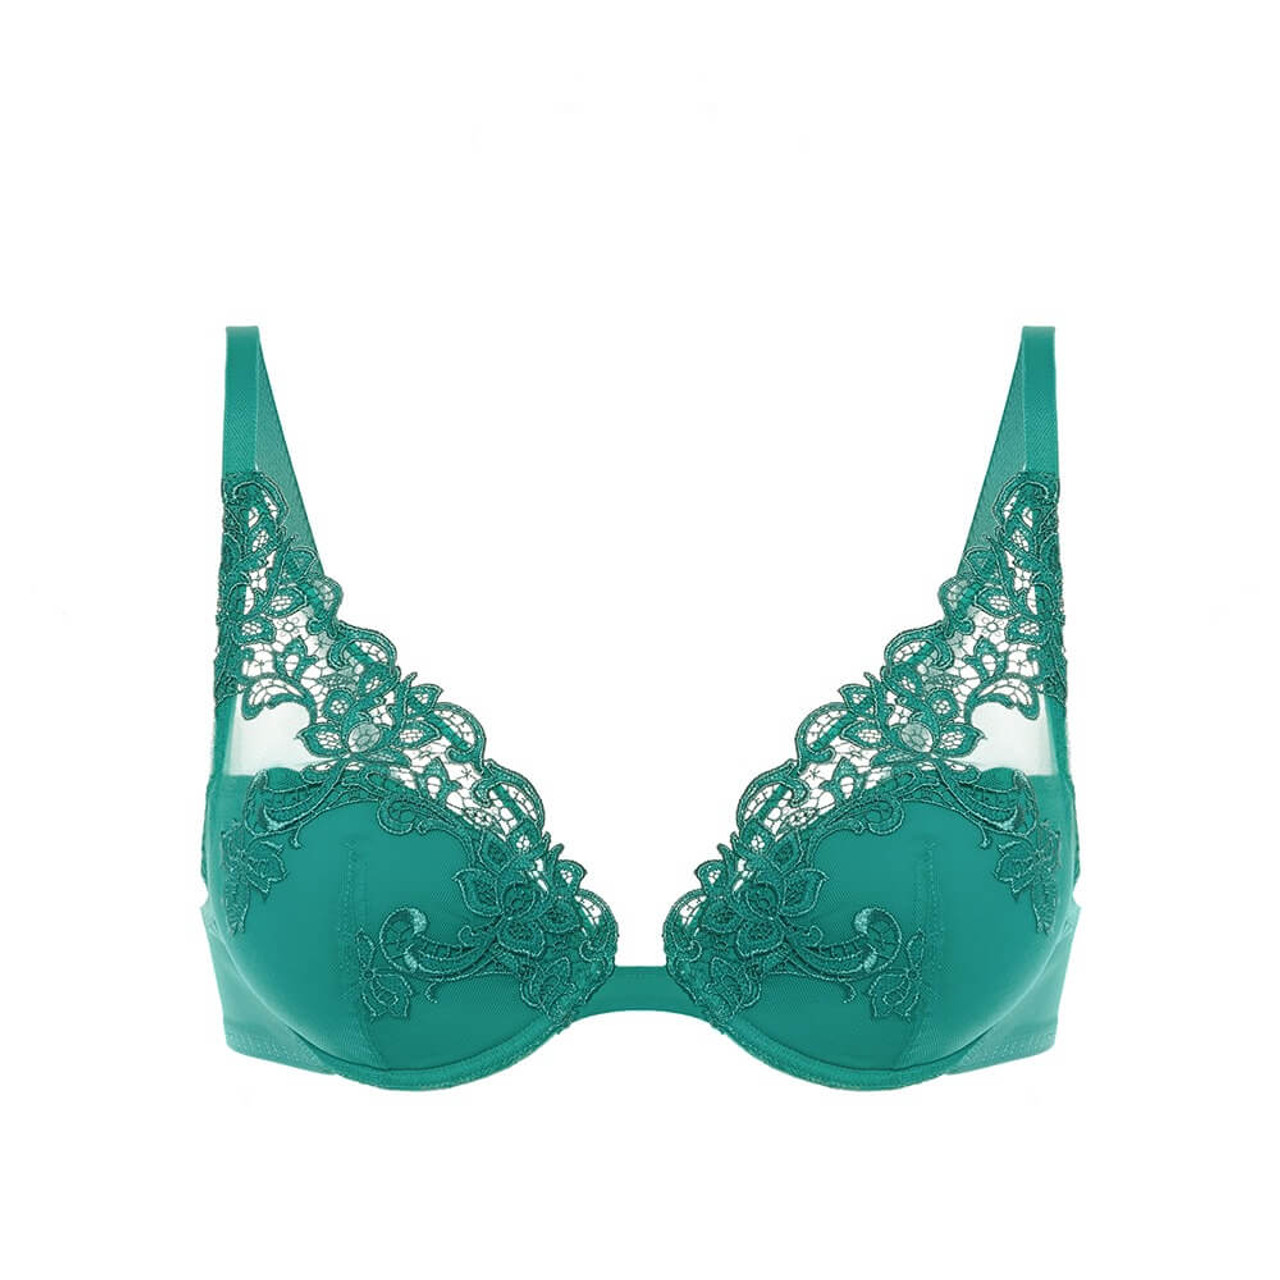 Buy Peach Bras for Women by Trylo Oh So Pretty You Online